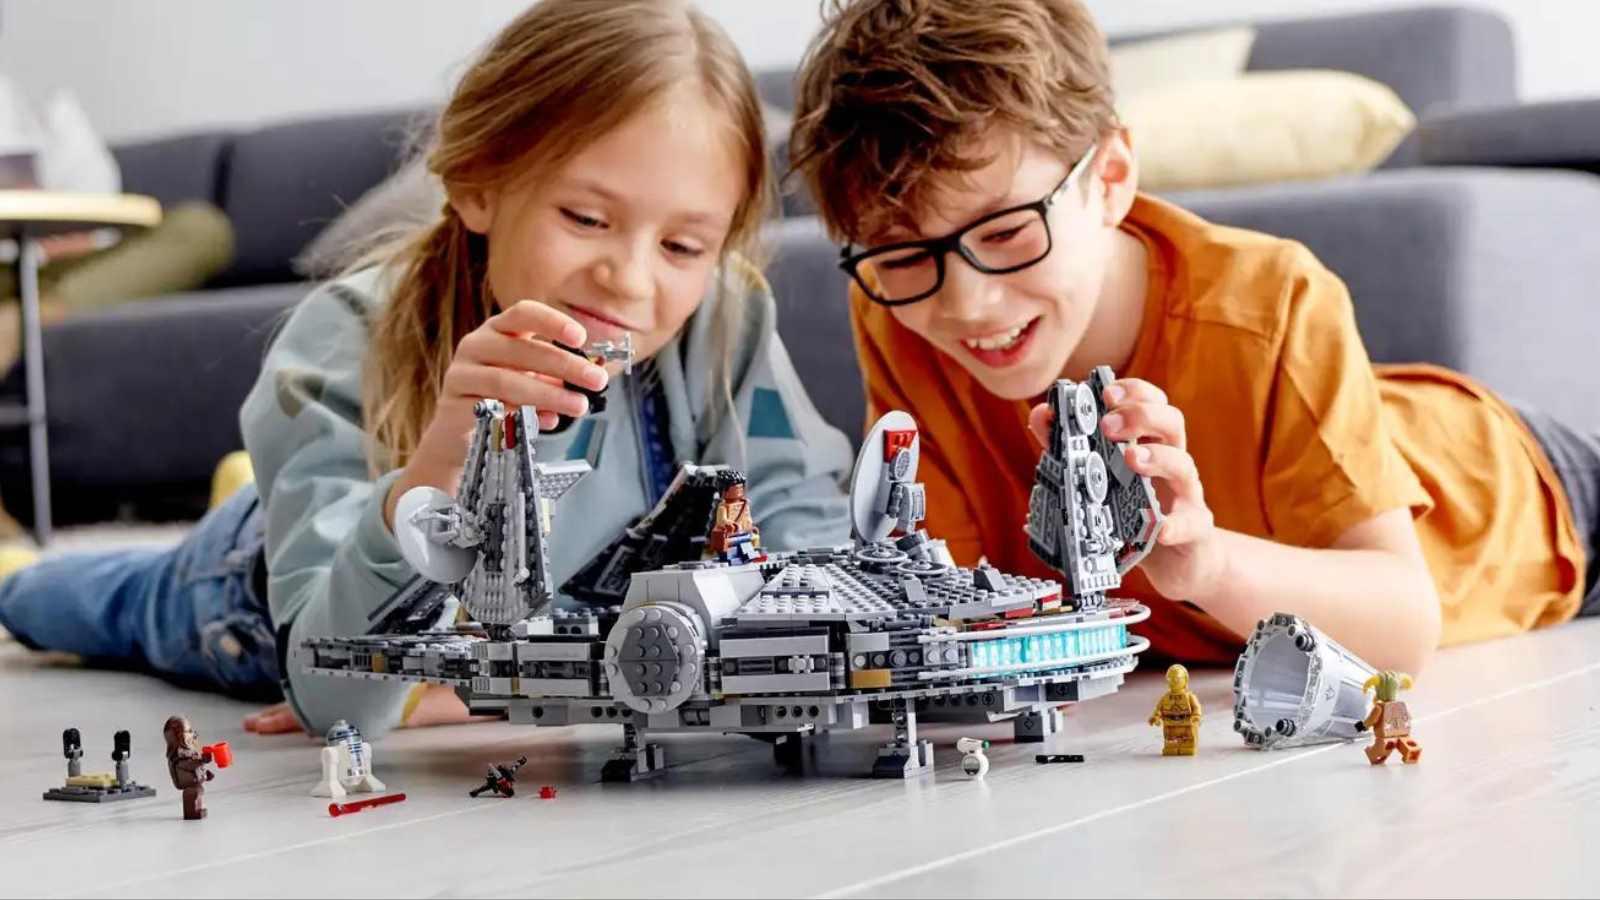 Two kids playing with their LEGO-reimagined Millennium Falcon